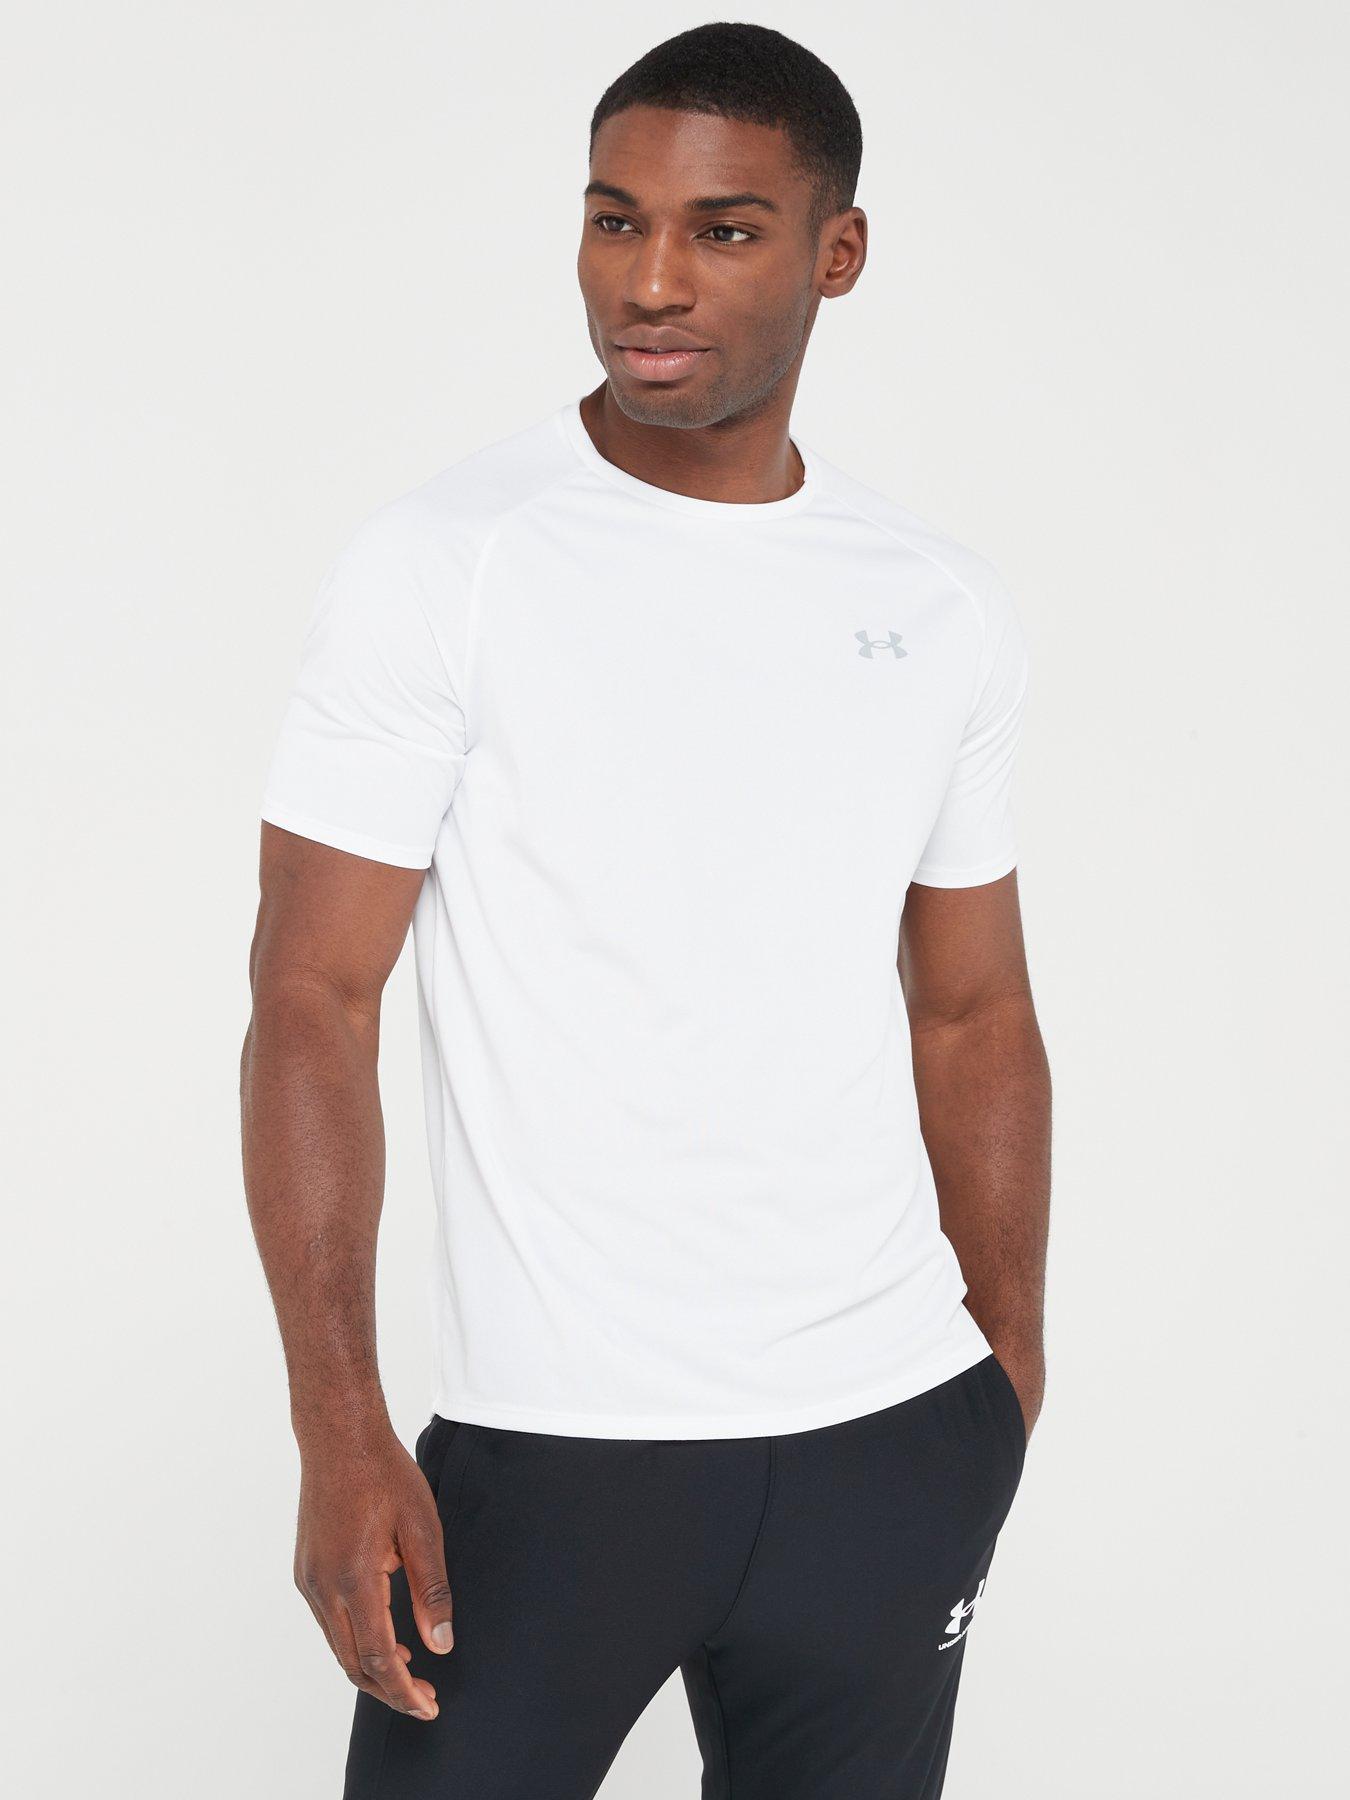 White | Under armour | & polos | Men | www.very.co.uk